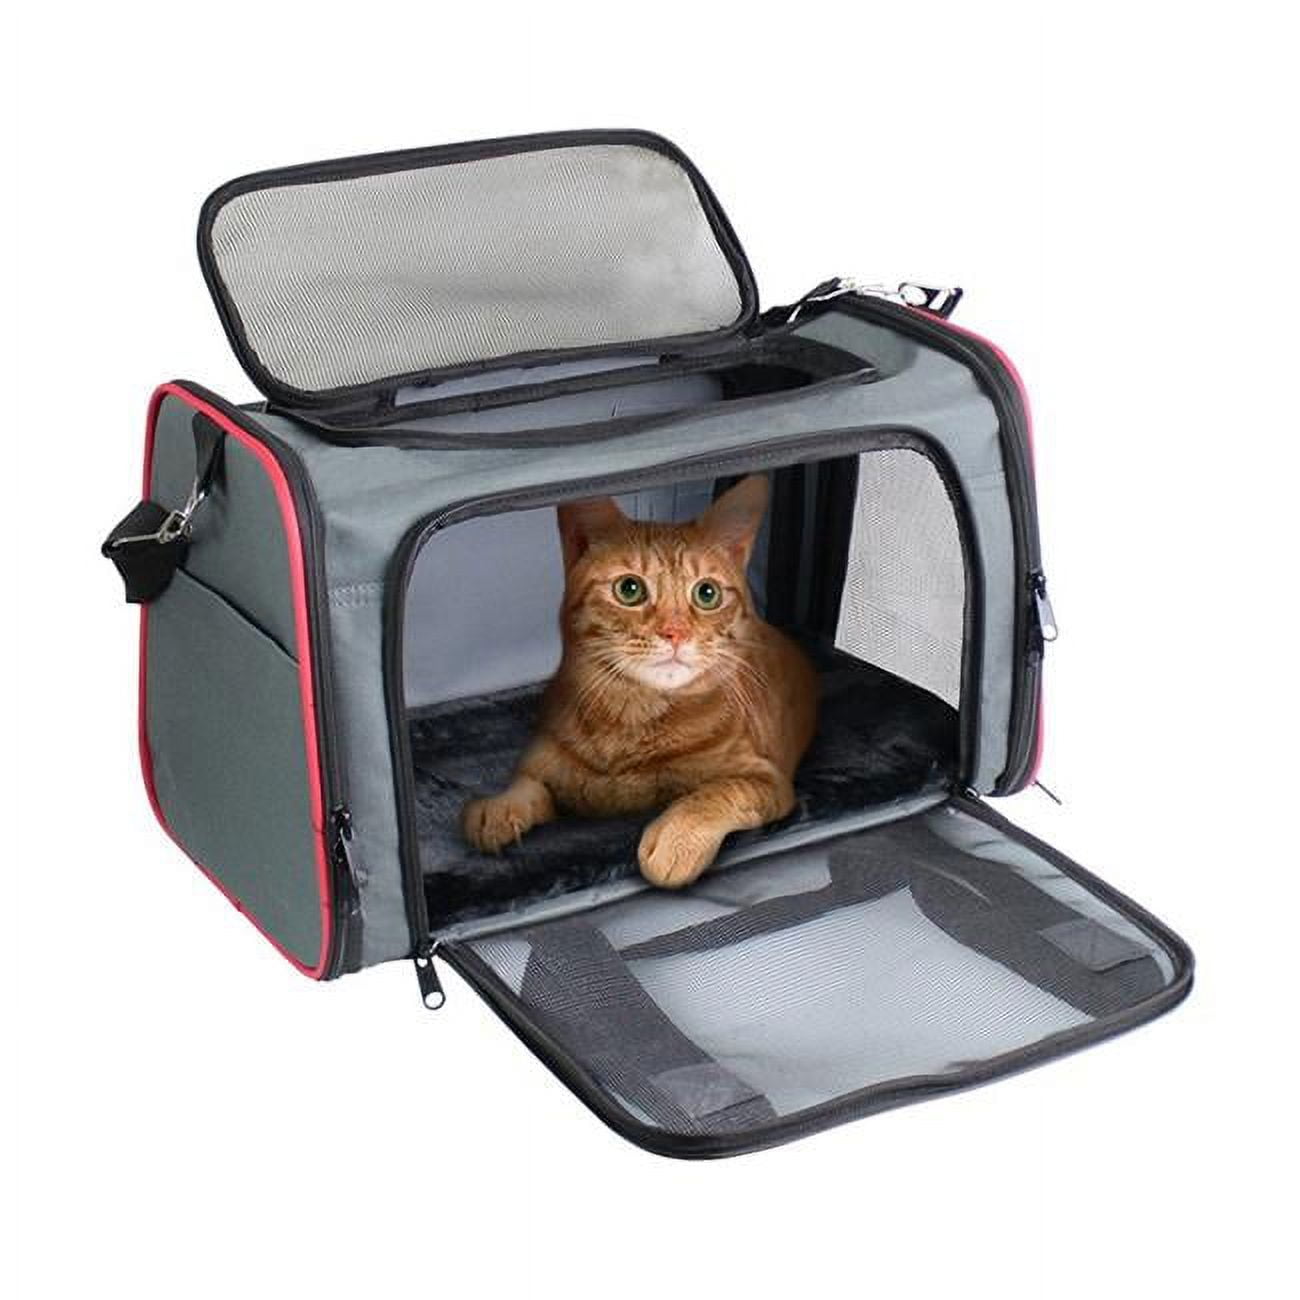 GAPZER Pet Carrier for Large Cats 20 lbs+ / Soft Sided Small Dog Travel  Carrier Top Load/Collapsible Carrier Bag for Big Cat / 2 Kittens Sturdy